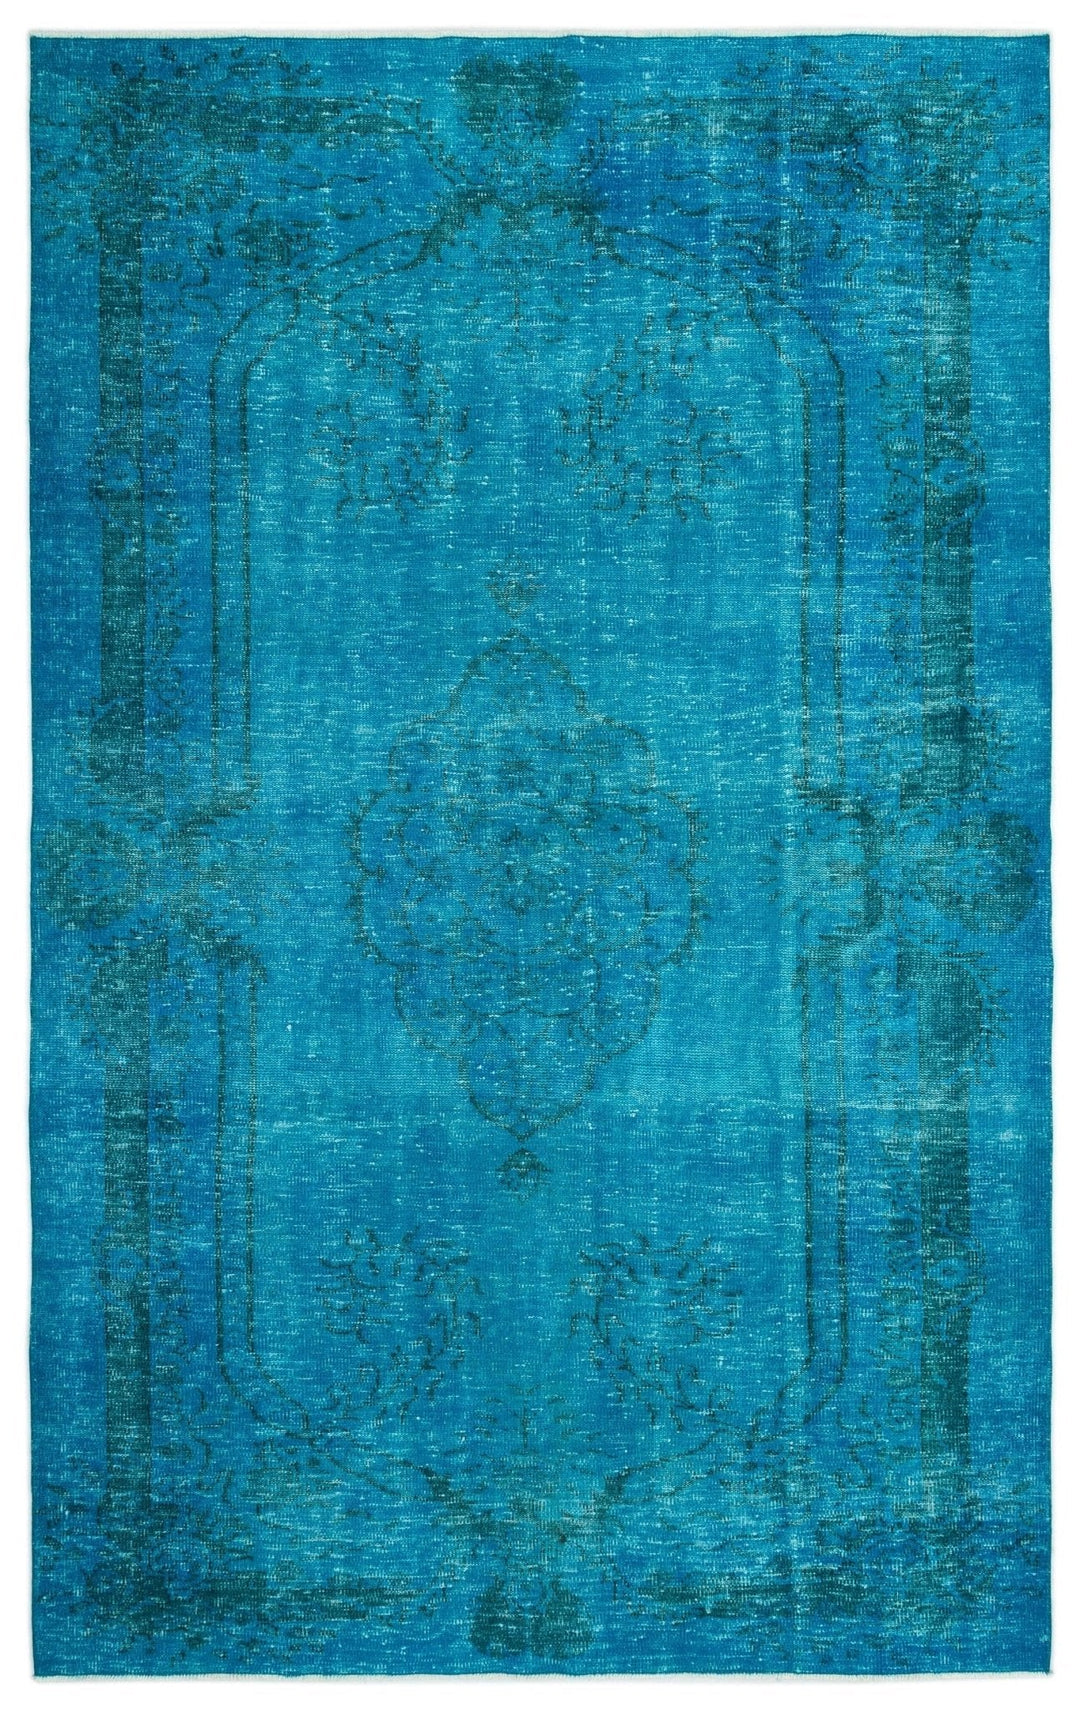 Athens 19412 Turquoise Tumbled Wool Hand Woven Rug 184 x 302